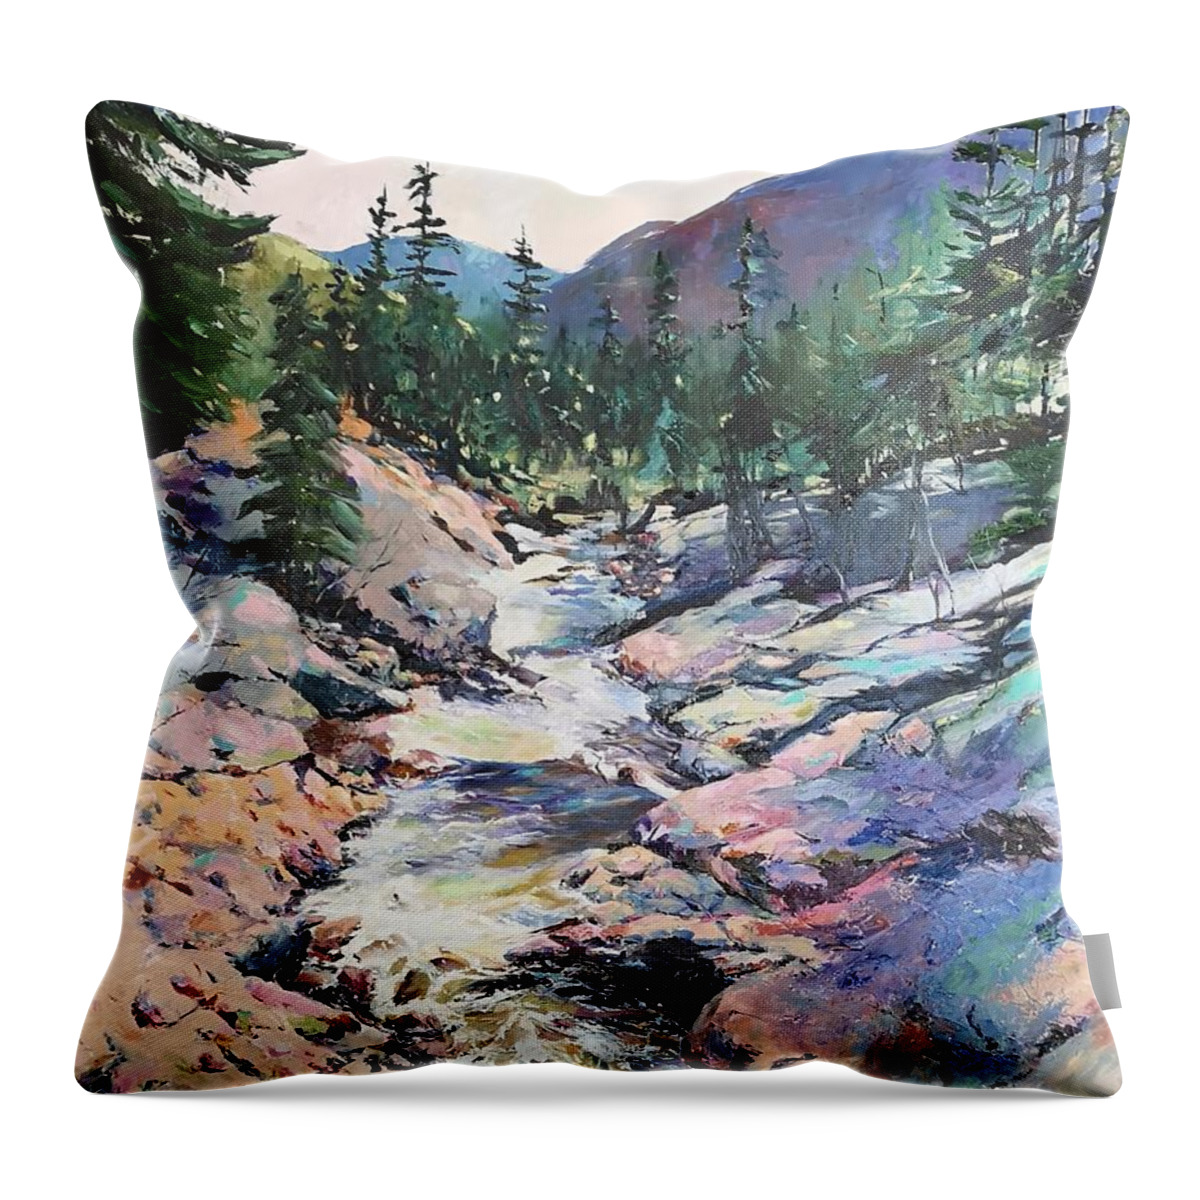 Water Throw Pillow featuring the painting River by Sheila Romard